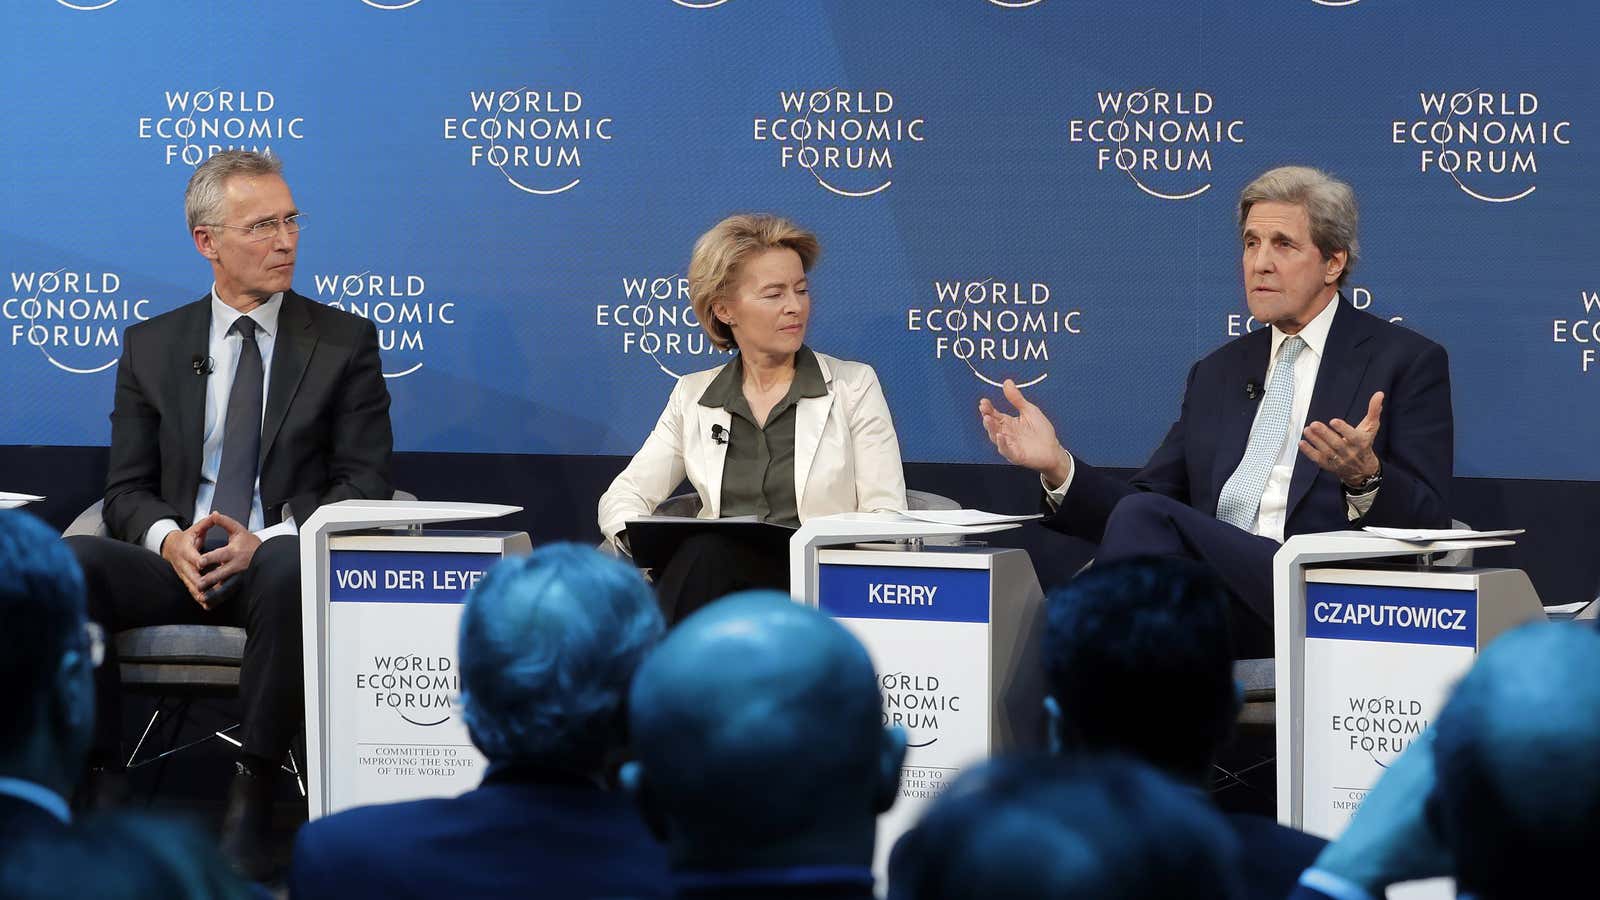 Davos delegates are categorized from 1 to 7 by the WEF